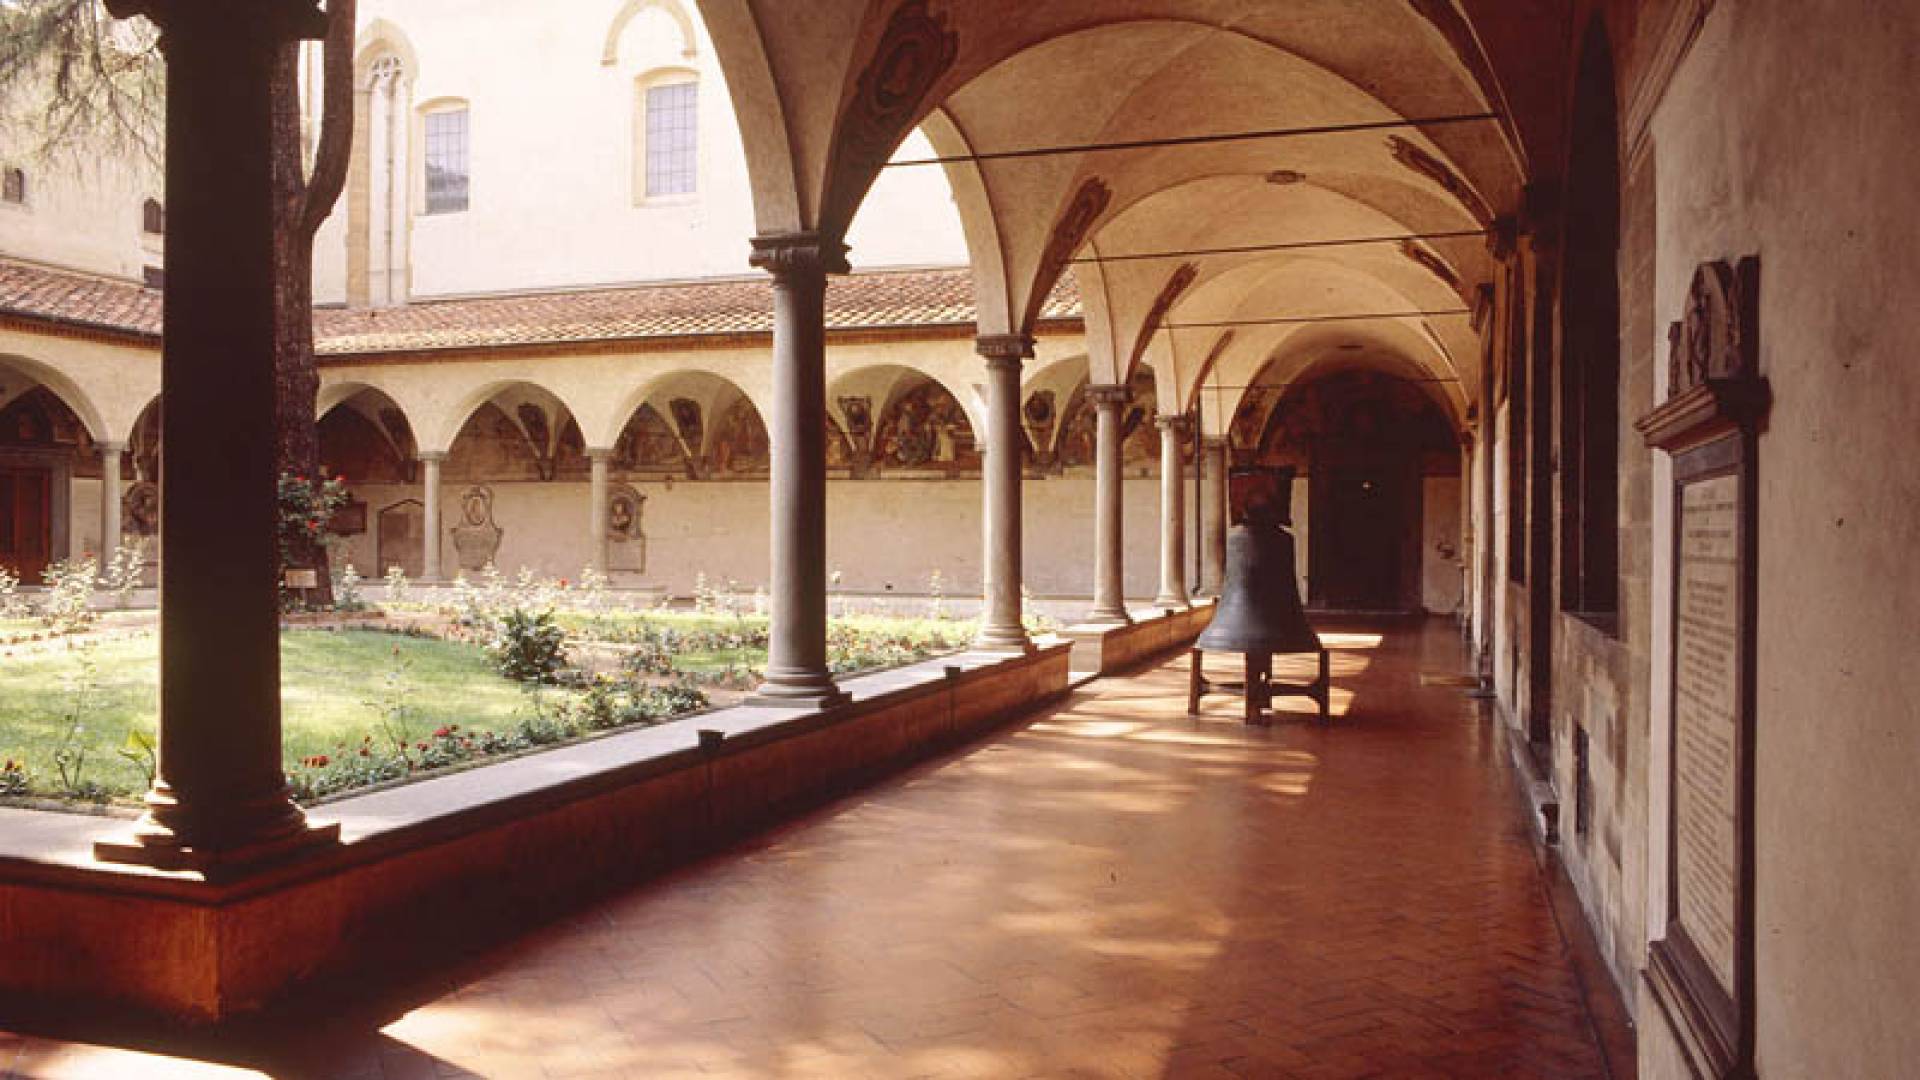 SAN MARCO FIRENZE, Museo - Chiostro